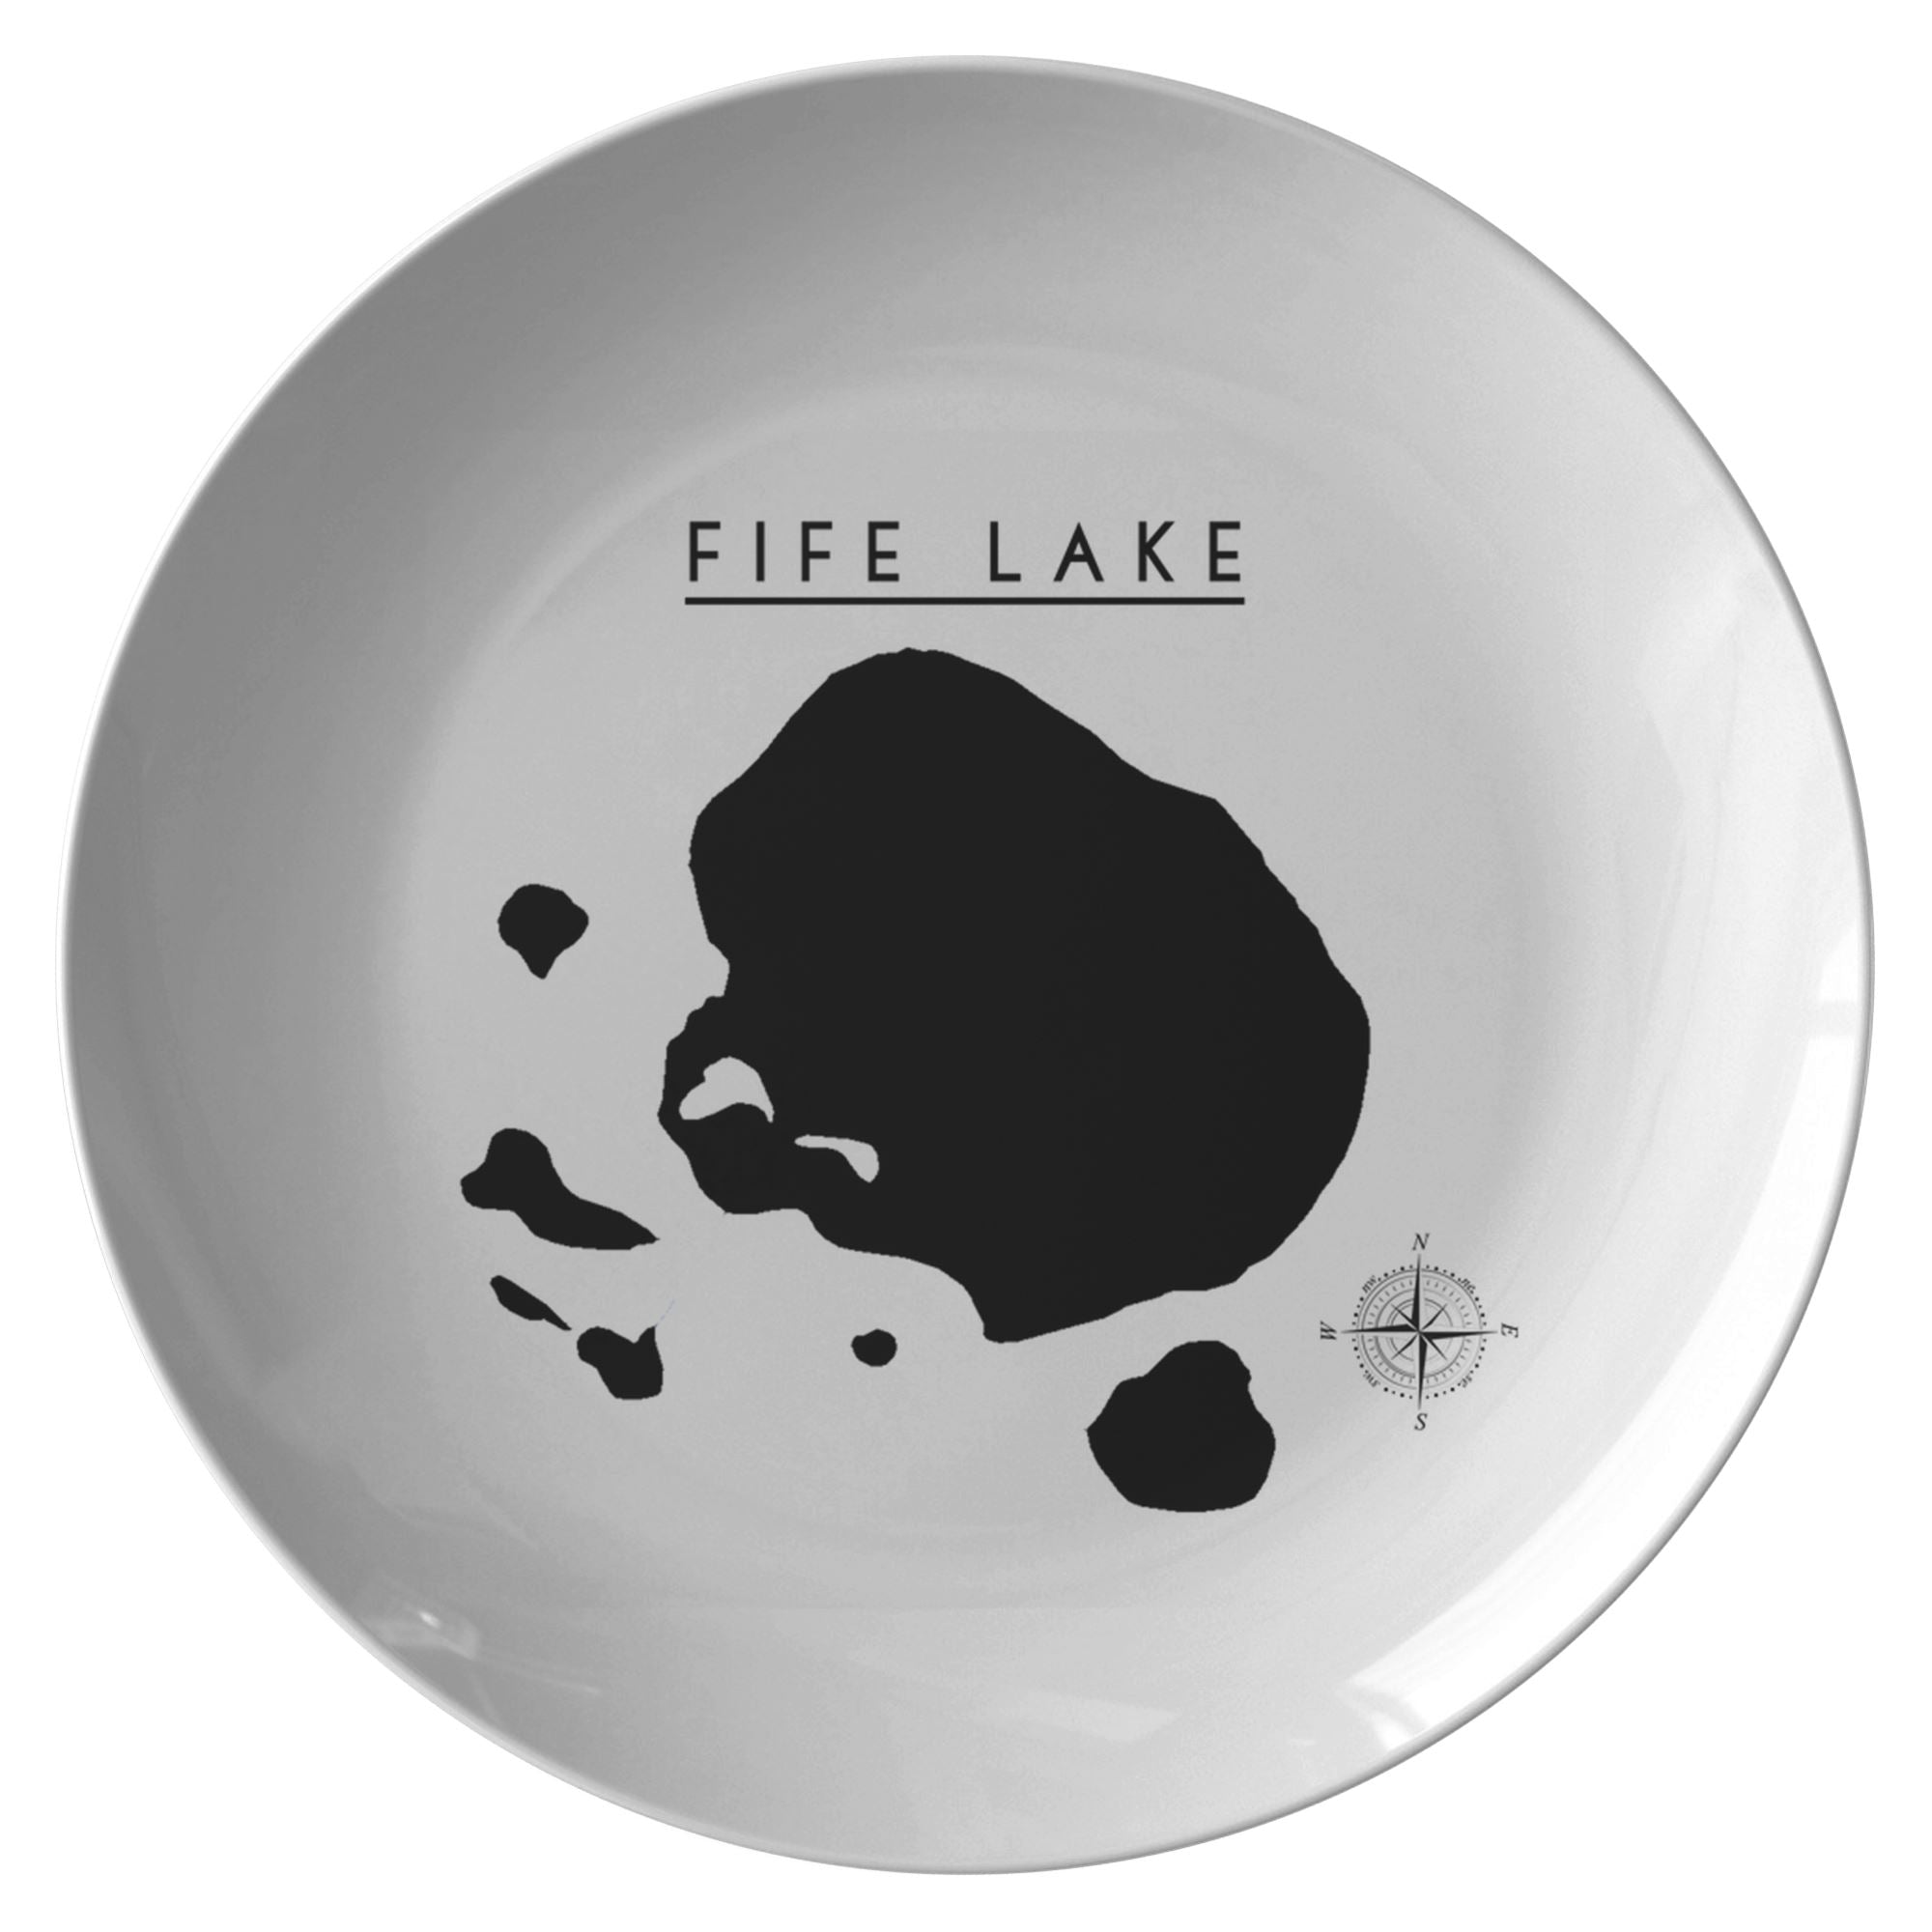 Fife Lake Map Plate, Lake Gift, Printed, Valentines Day Gift For Boaters, Microwave Safe Polymer Plastic (No Melamine), Dinner Plate Dinnerware Single Plate 